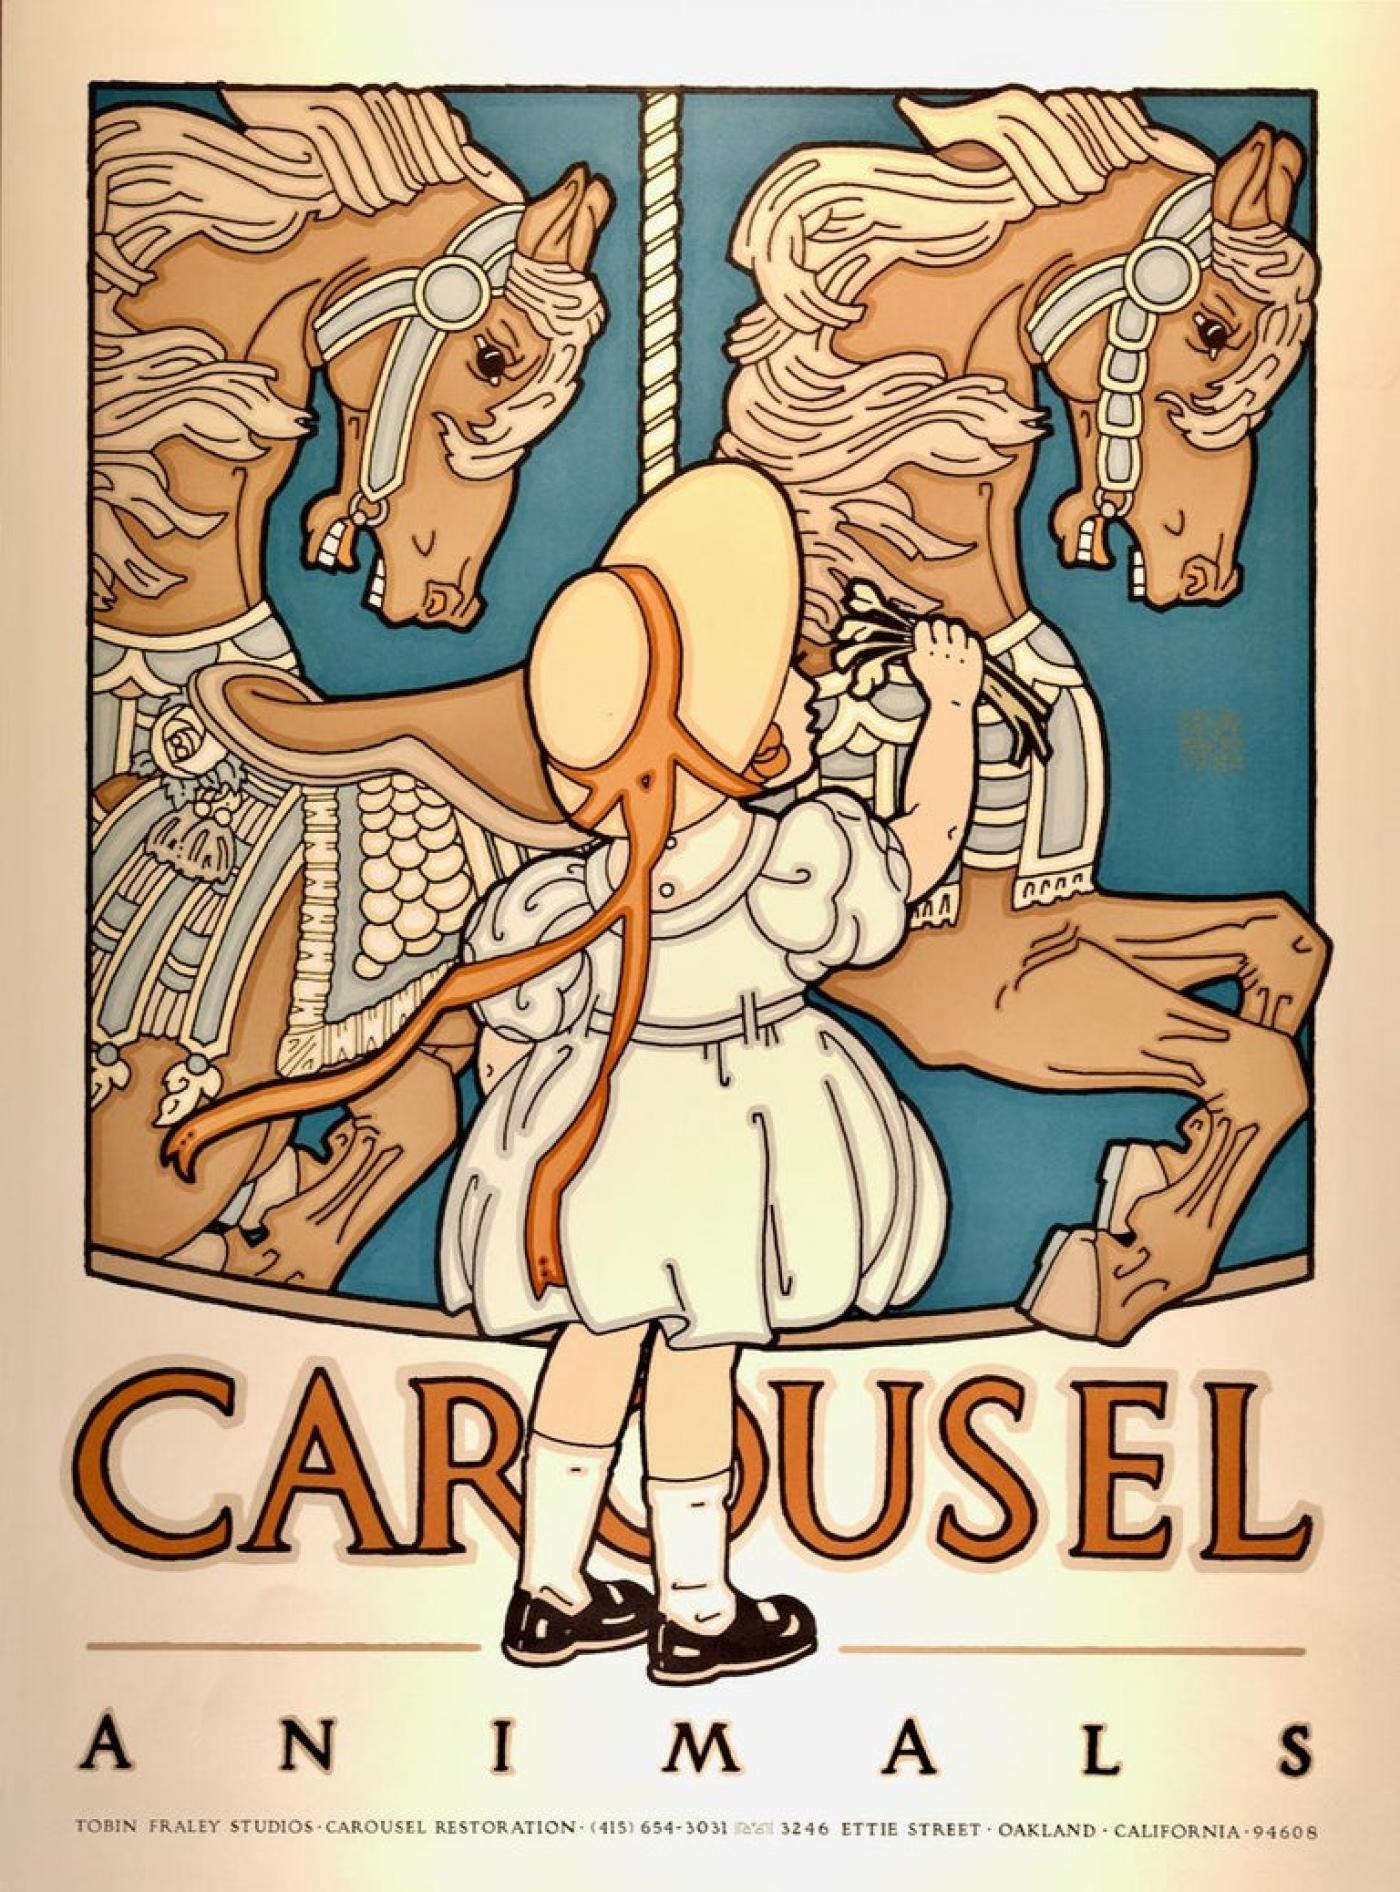 https://cdn.incollect.com/sites/default/files/zoom/-David-Lance-Goines-Carousel-Animals-A-Limited-Edition-Goines-Graphic-Art-Poster-619946-2946833.jpeg